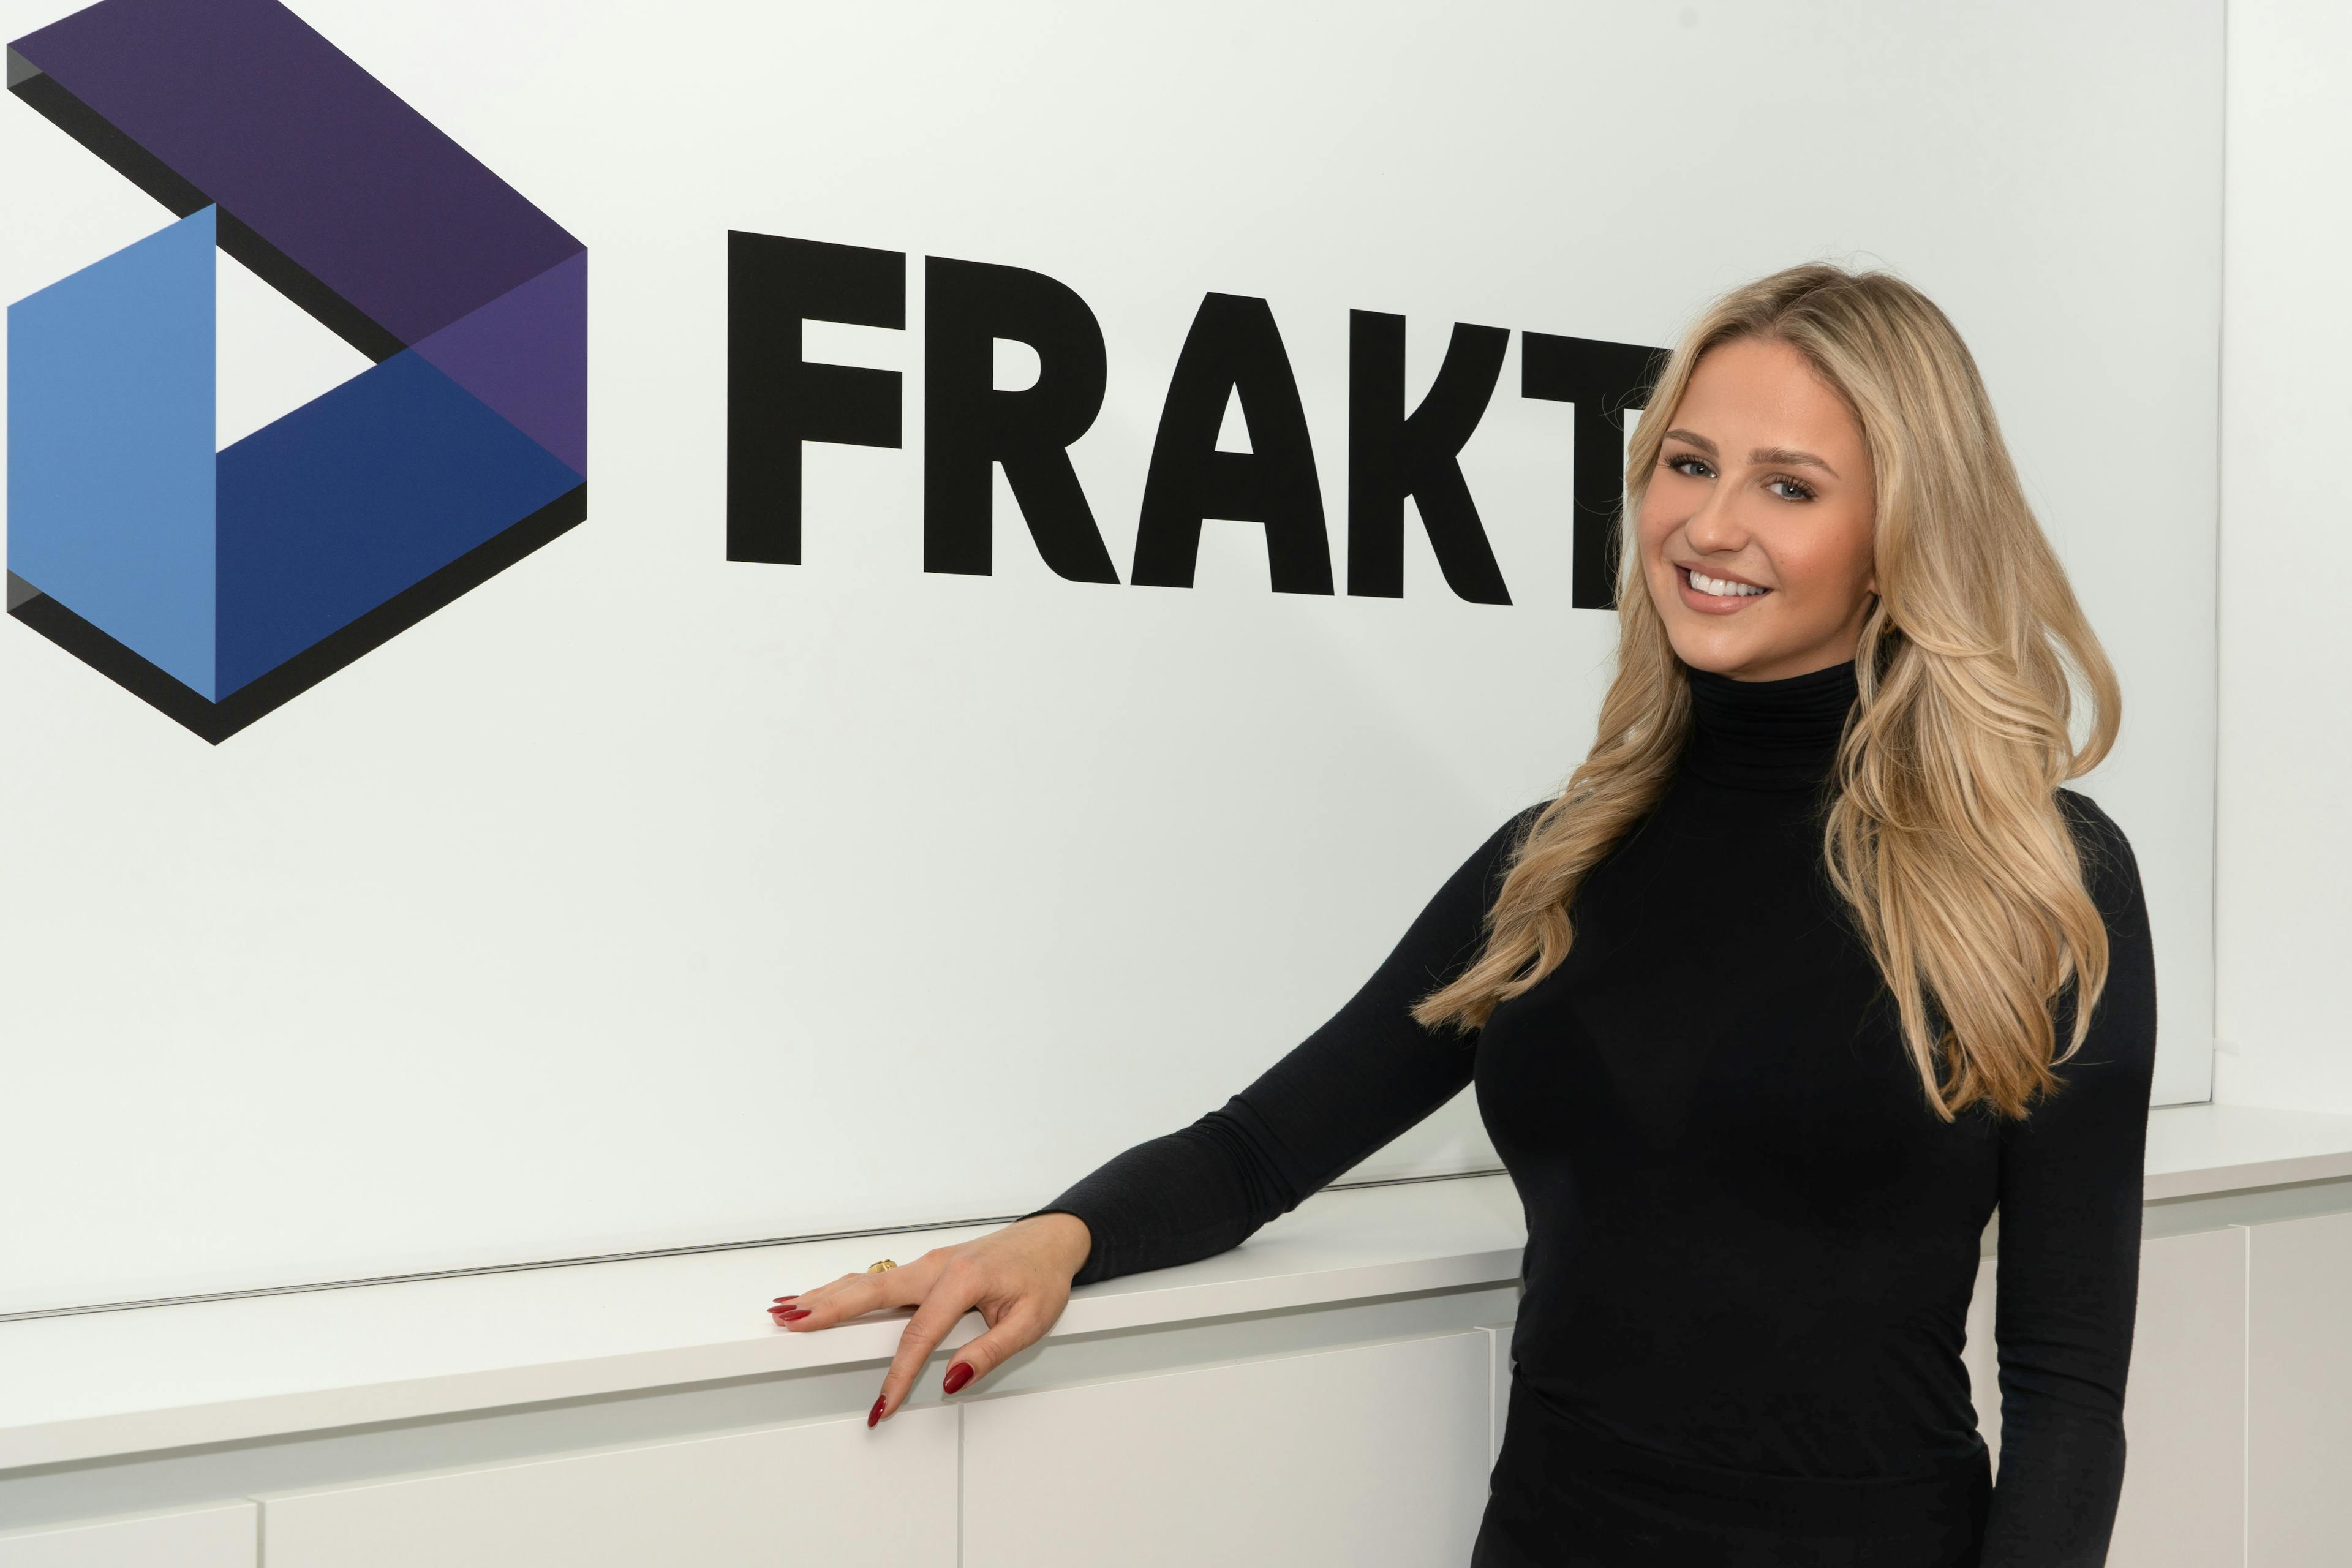 Isabell Lehmann, an associate partner at Fraktal Development, stands with a warm smile, leaning slightly against a counter. Her long blonde hair cascades over a stylish black turtleneck, complementing the professional ambiance. The prominent 'FRAKTAL' logo with its distinctive geometric design adorns the wall behind her, symbolizing the company's innovative edge.